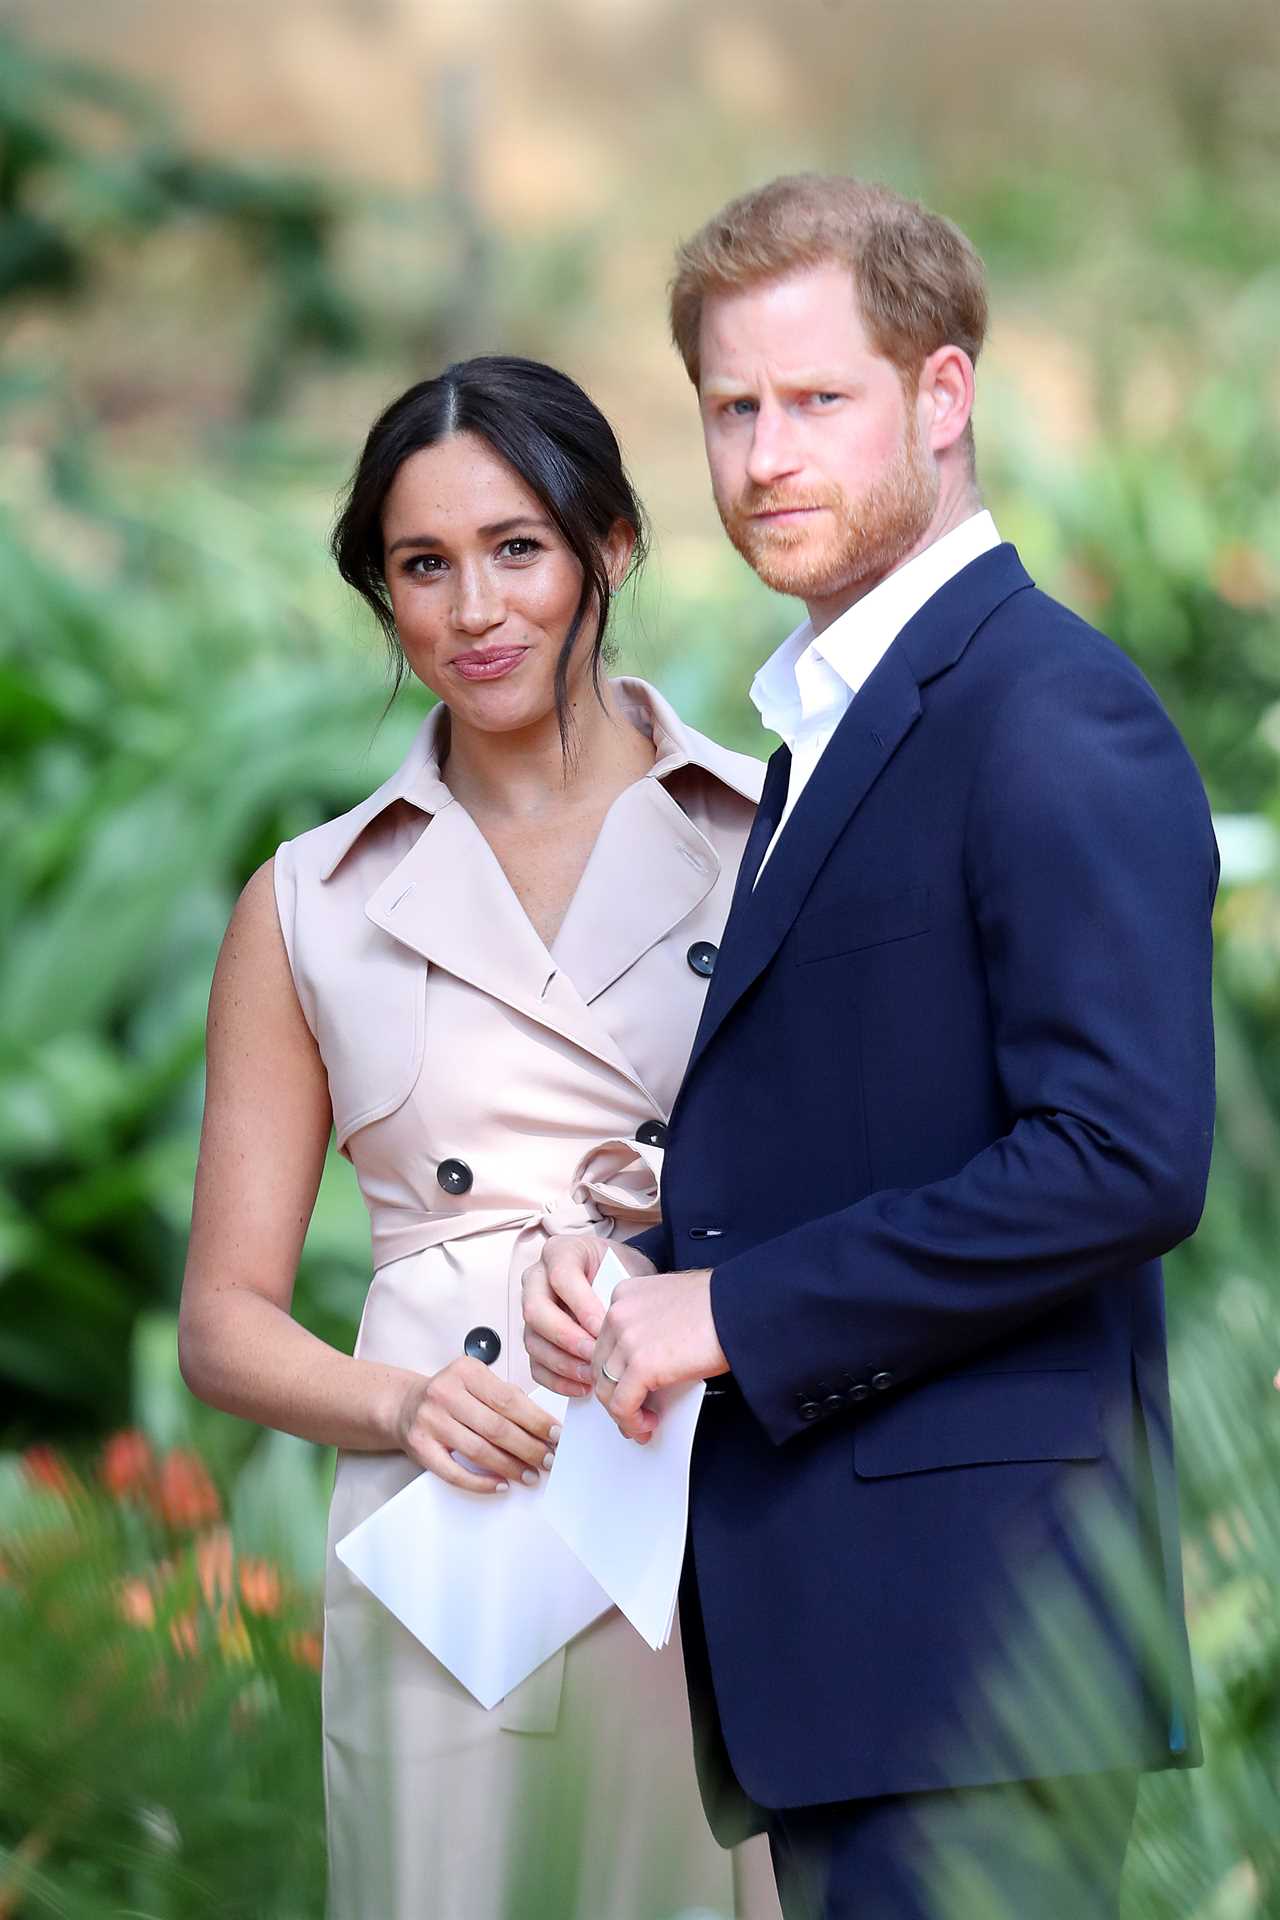 I’m a royal expert – Meghan Markle & Prince Harry’s empire is ‘crumbling’… here’s why future projects will be a disaster